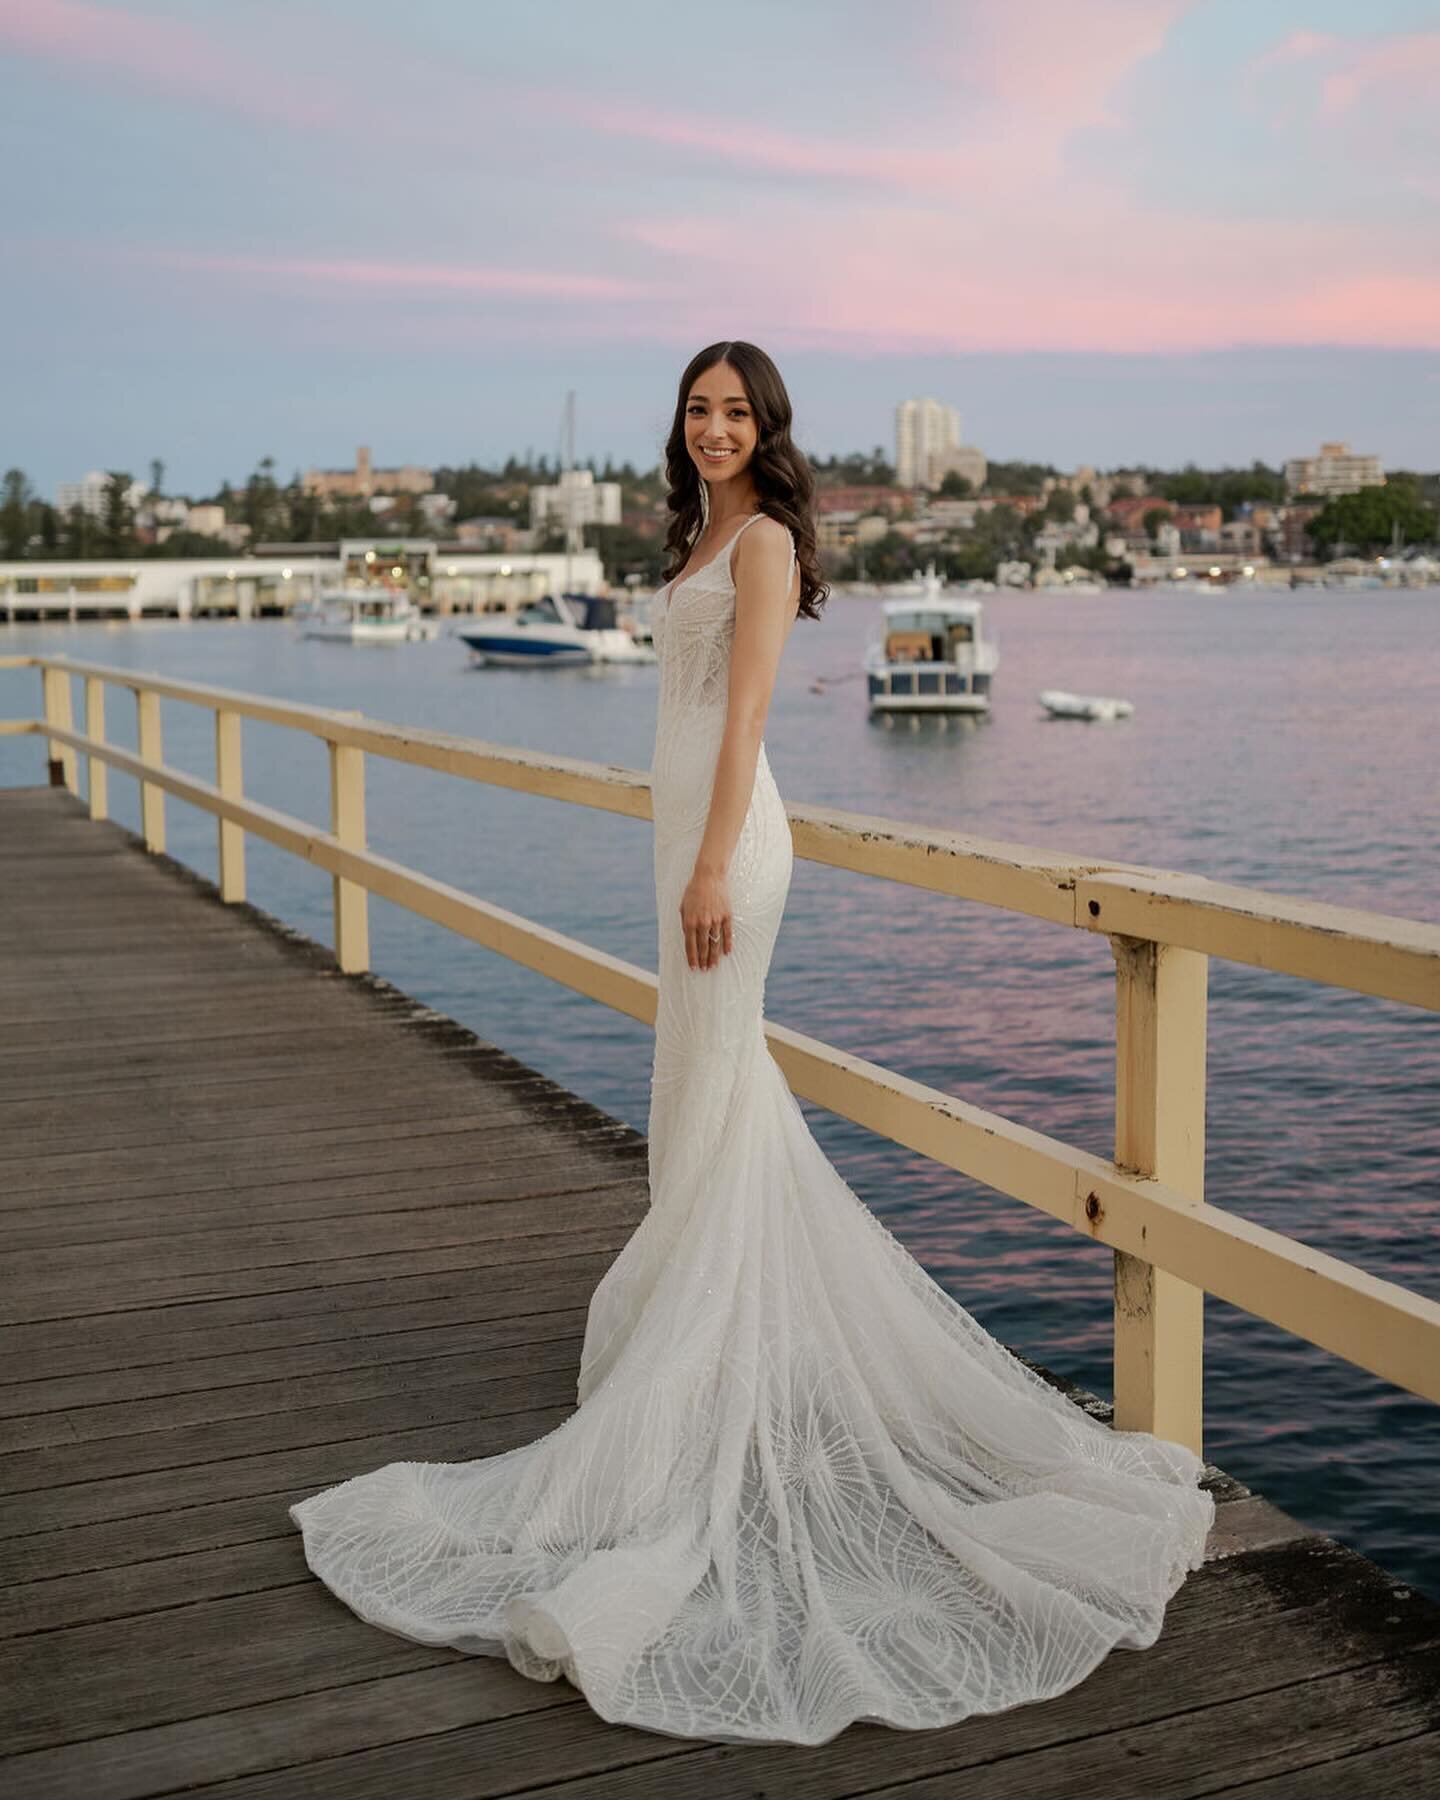 #BlancheBride Hayah looking like an absolute vision in her INARA gown 😍

We&rsquo;re absolutely obsessed with the way this gown sparkles with her every move! Congratulations again Hayah! We&rsquo;re you a lifetime of happiness 🥰

Swipe through to f